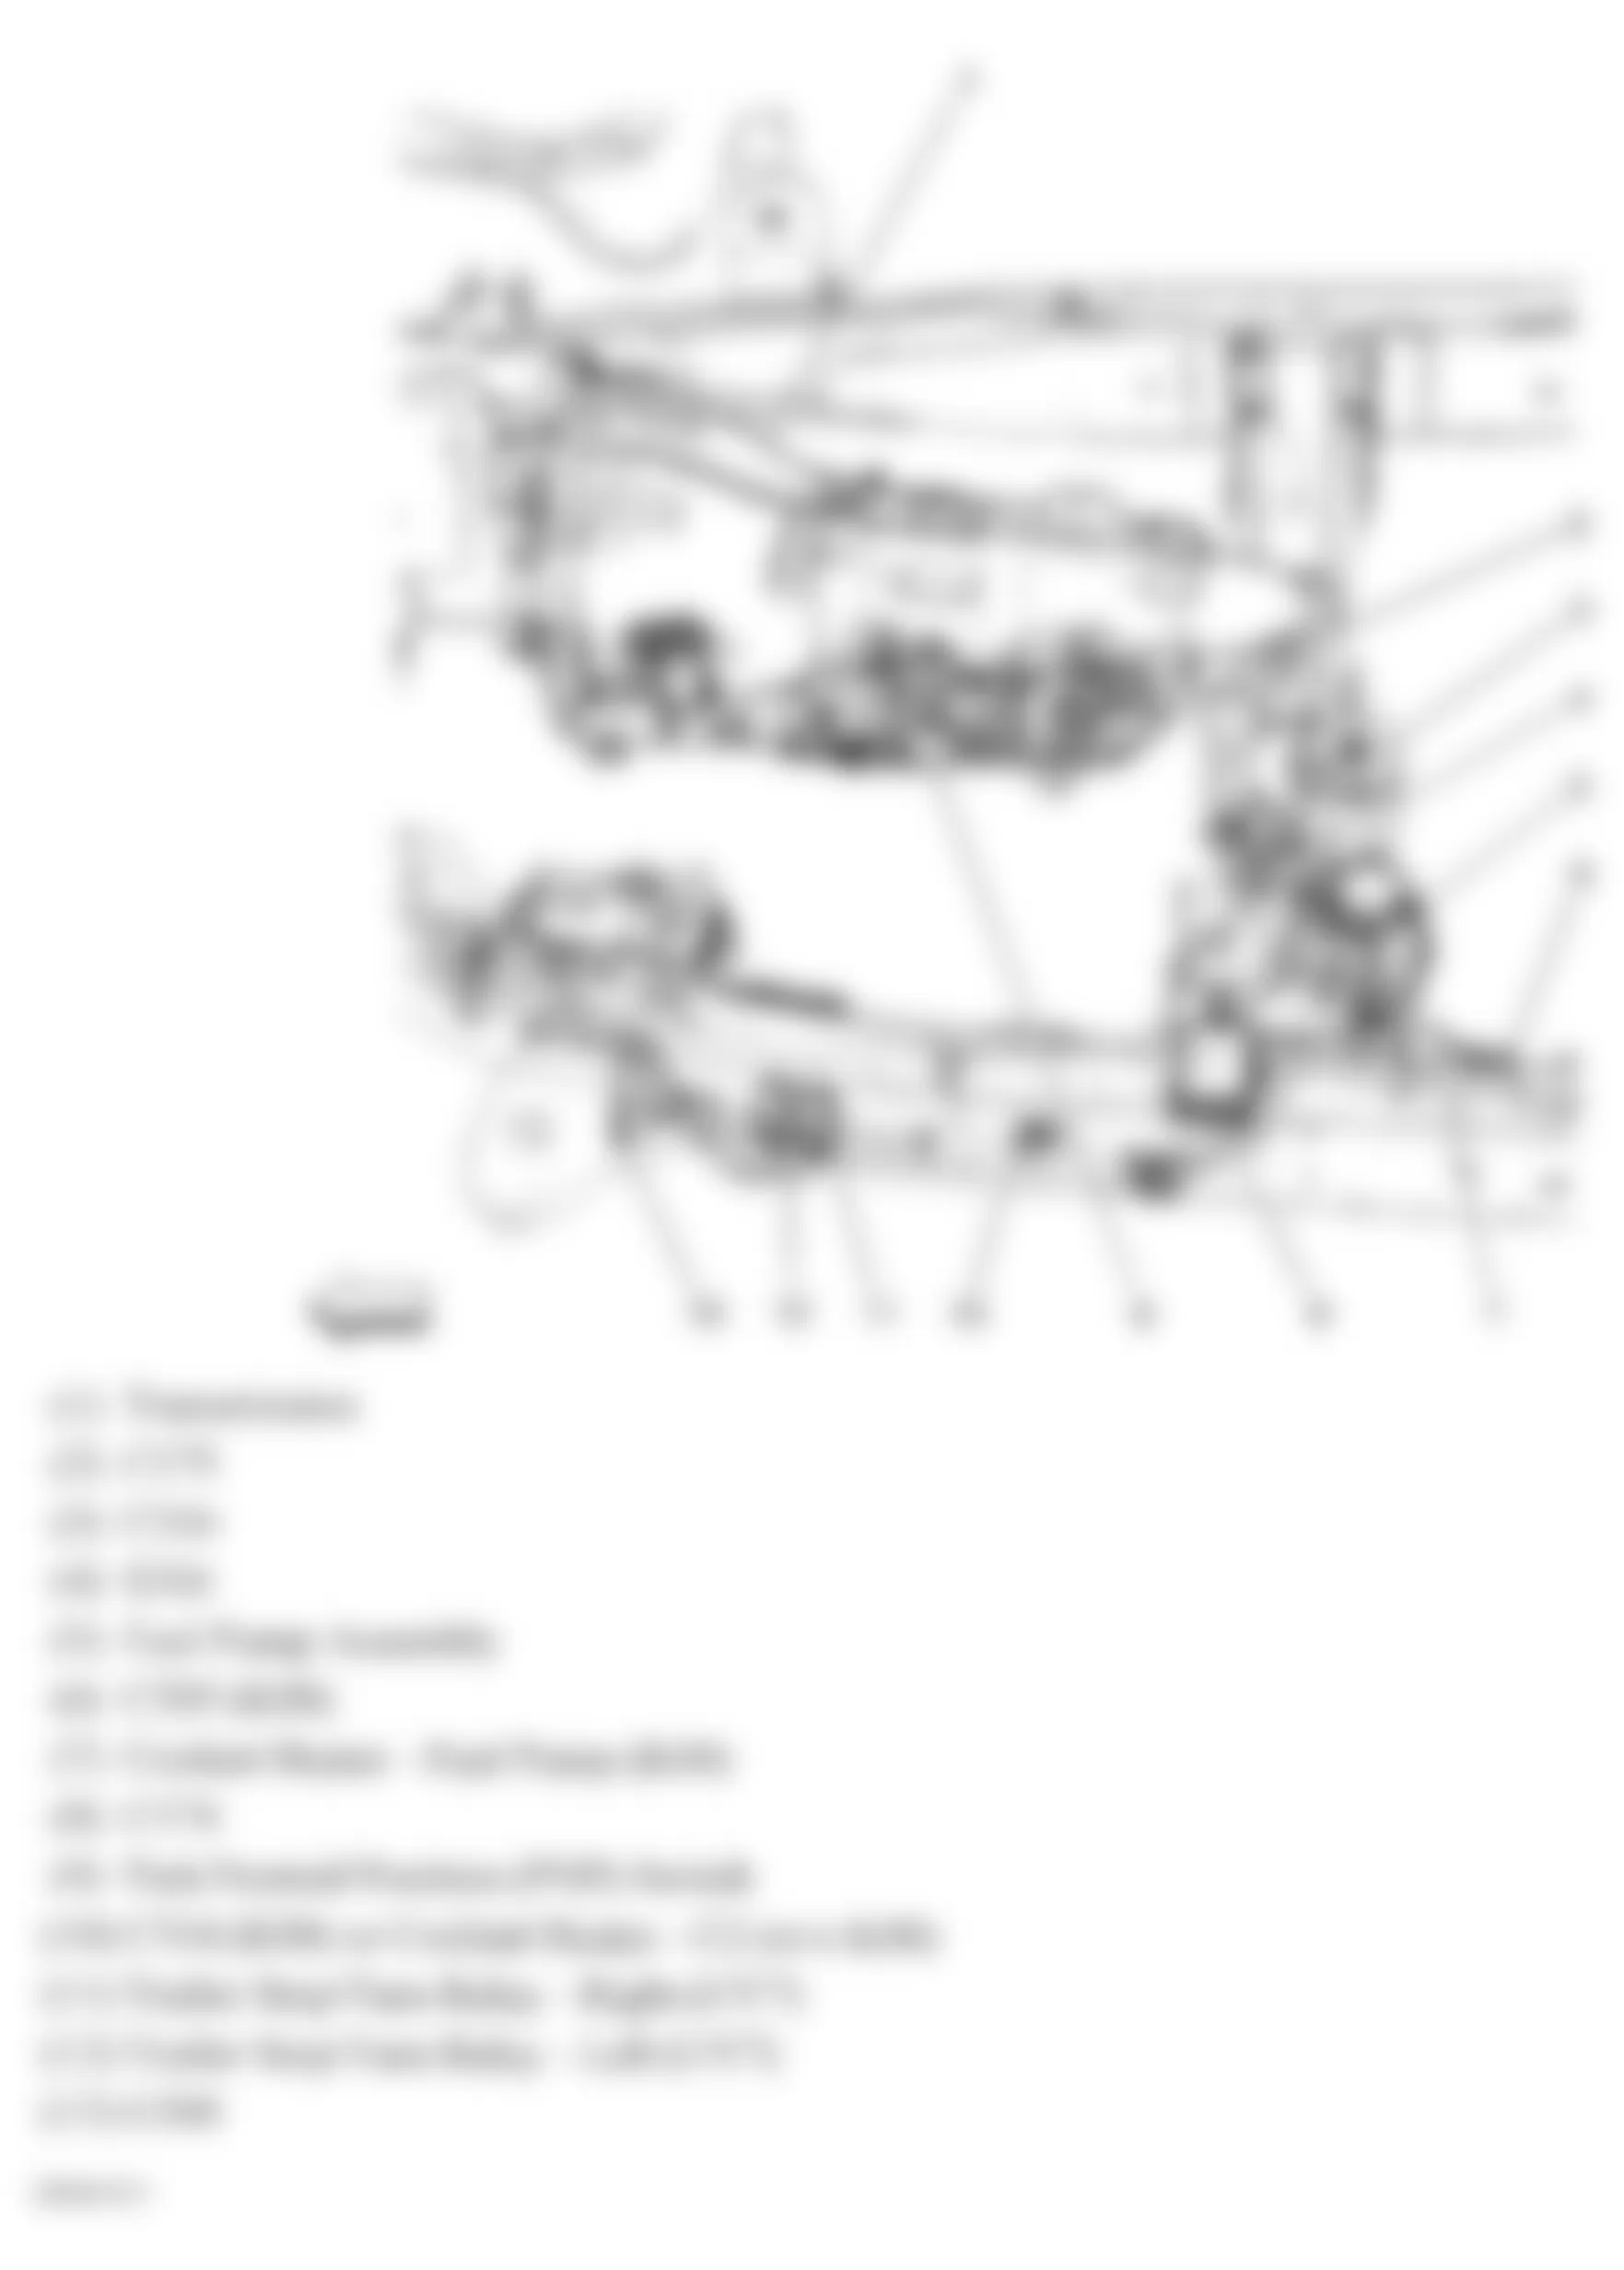 Chevrolet Chevy Express H1500 2007 - Component Locations -  Under Center Of Vehicle (6.6L)